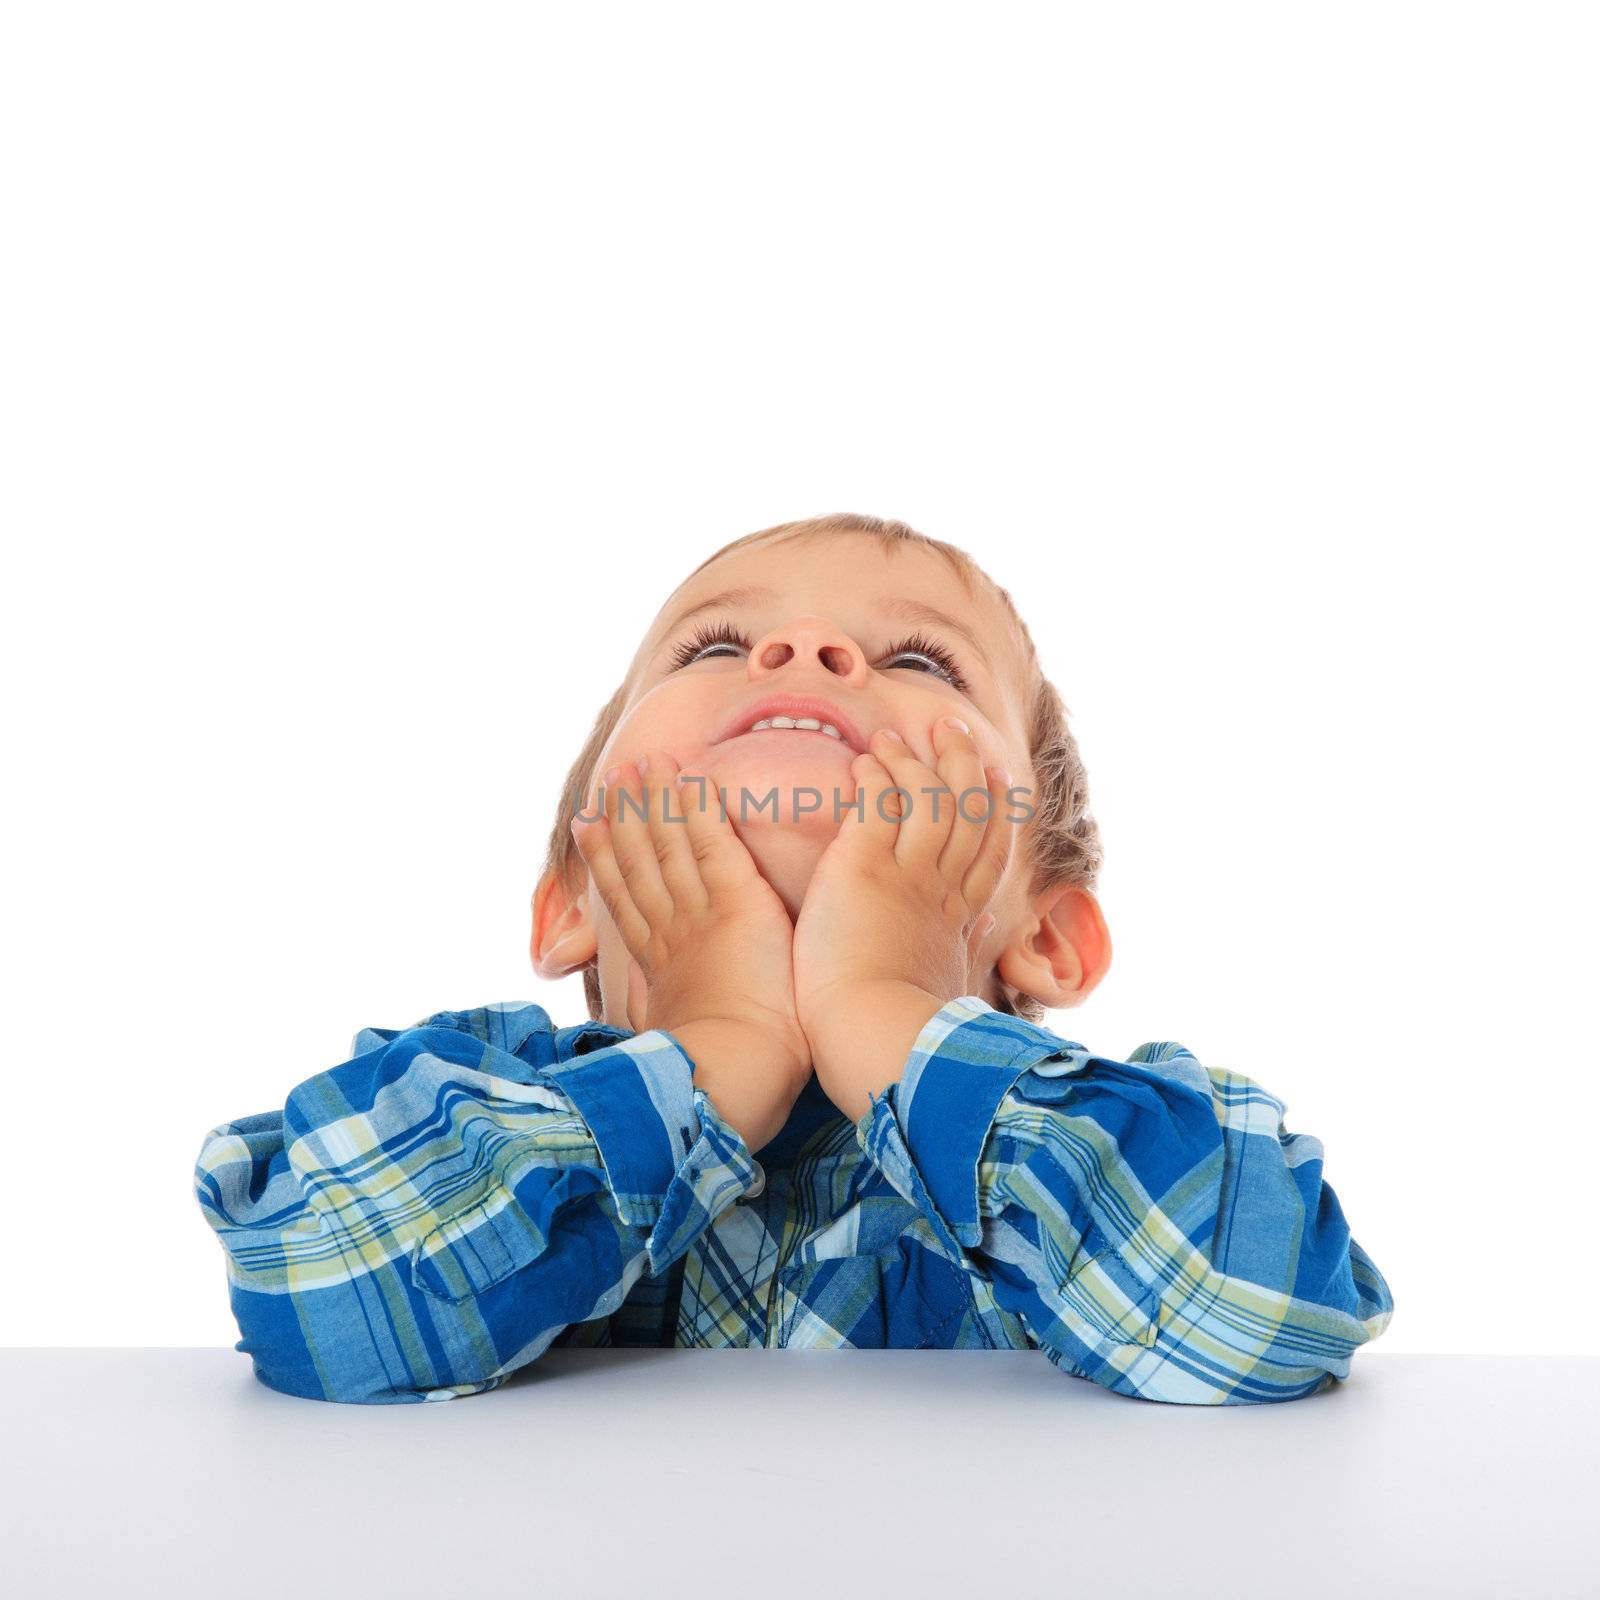 Cute caucasian boy looking up. All on white background.